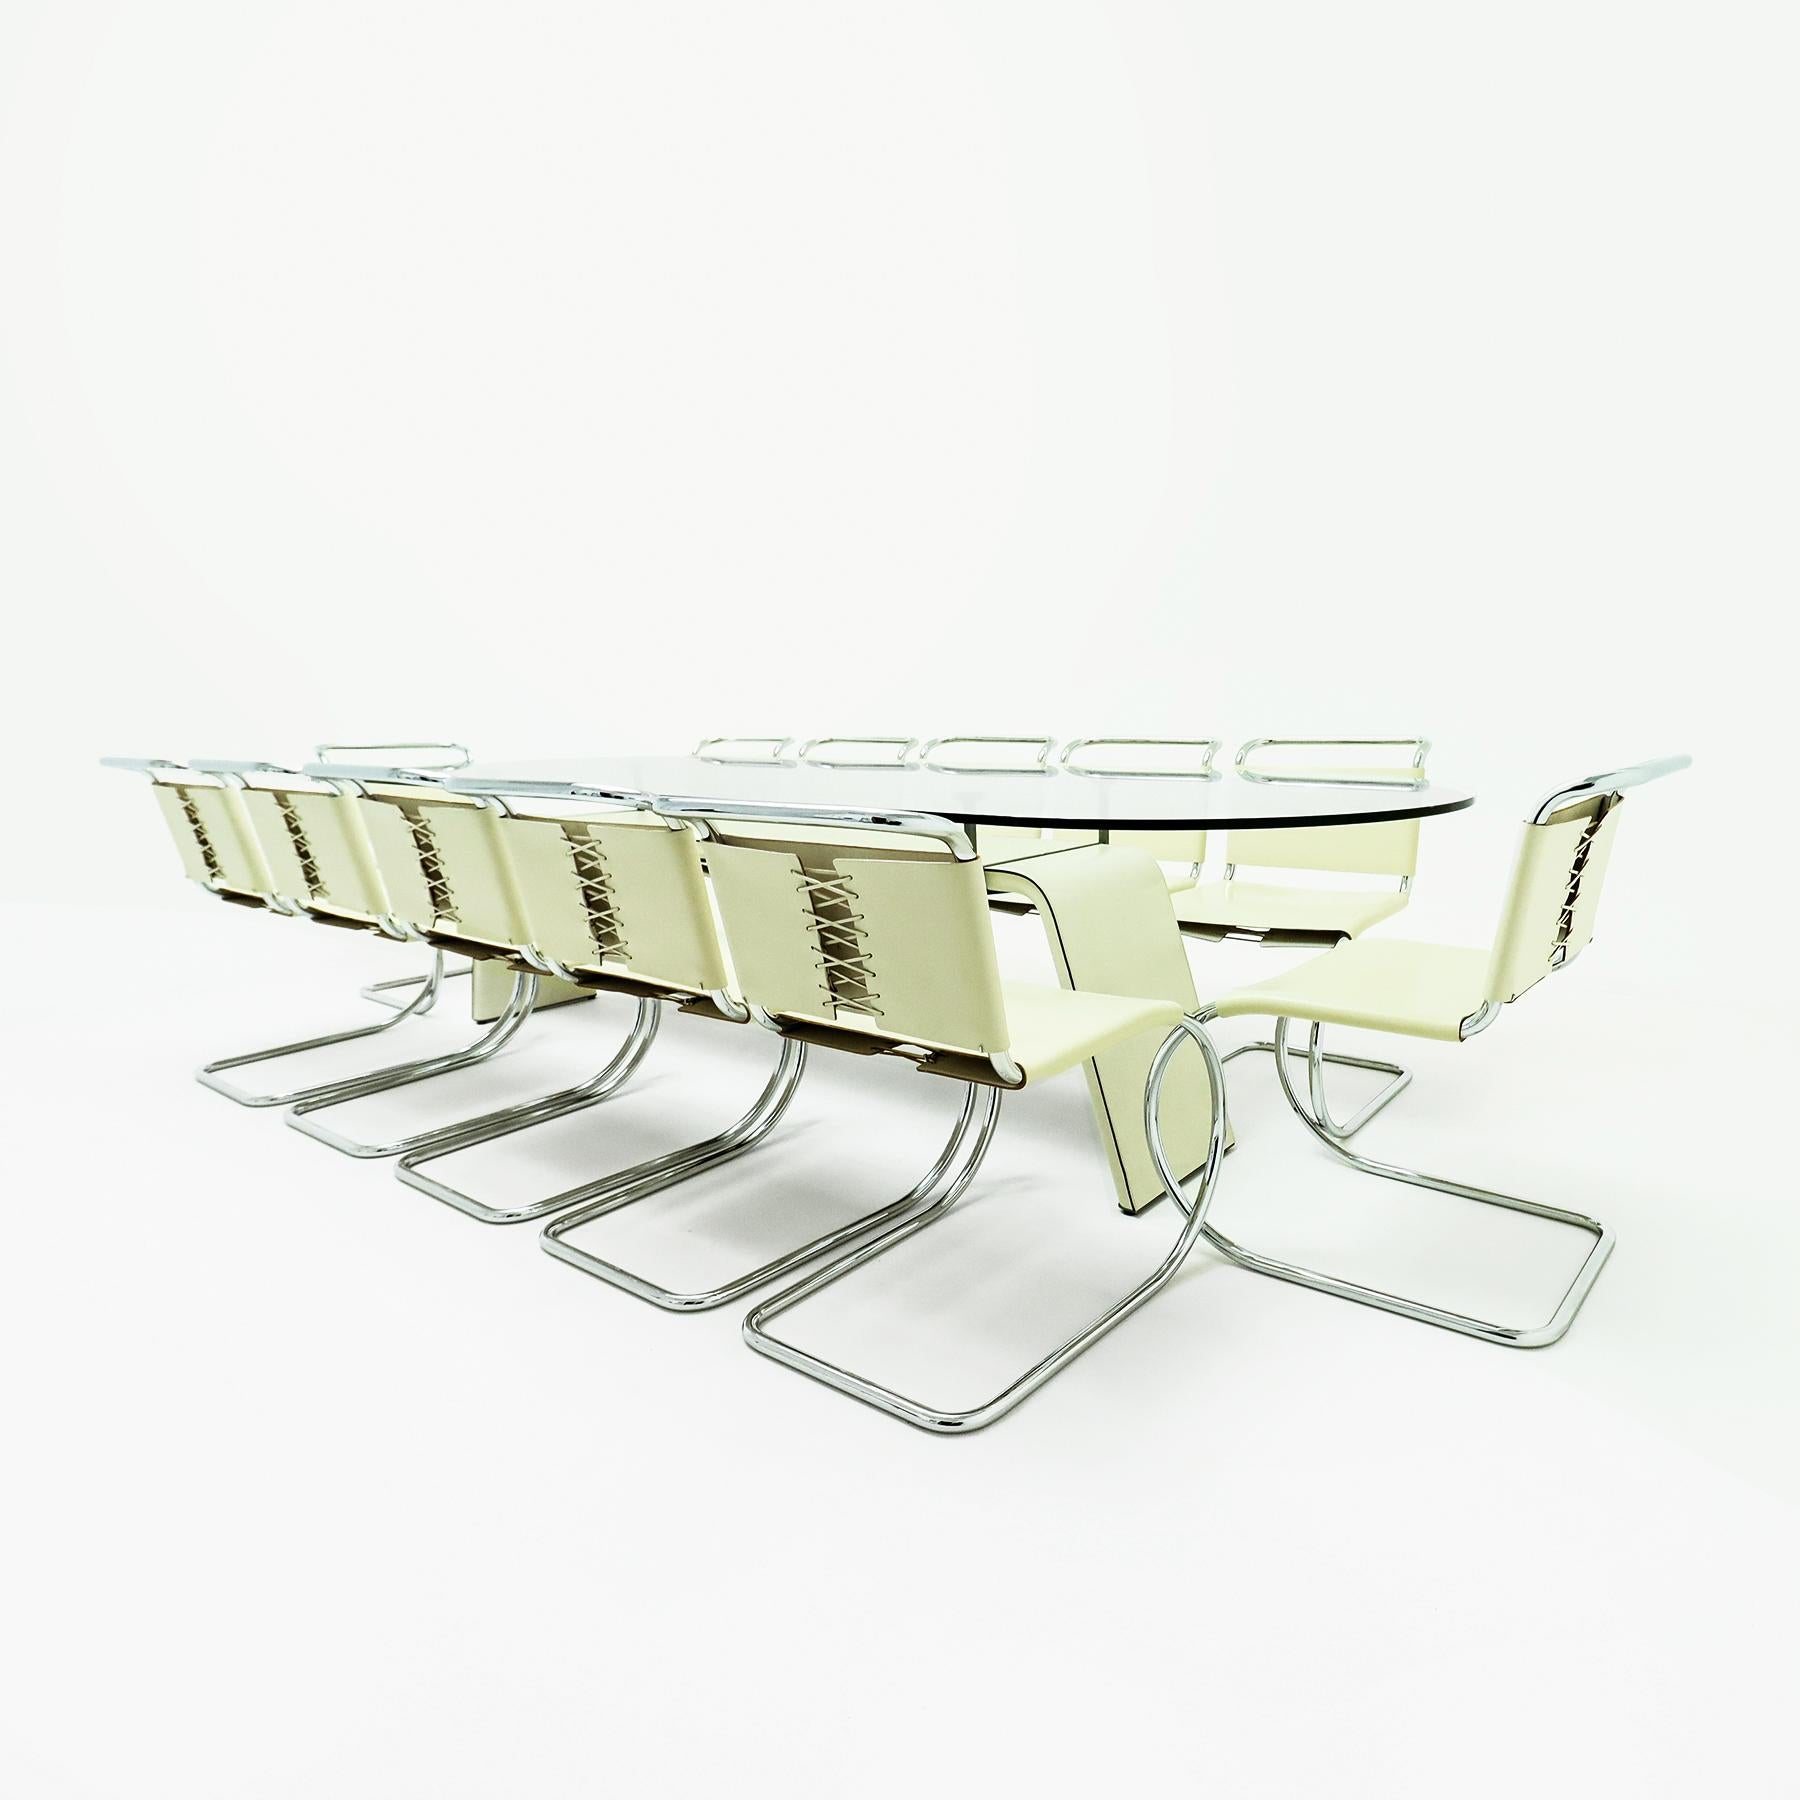 12 Knoll, Mies van der Rohe MR10 chairs matched to a Matteo Grassi dining table In Good Condition In Highclere, Newbury